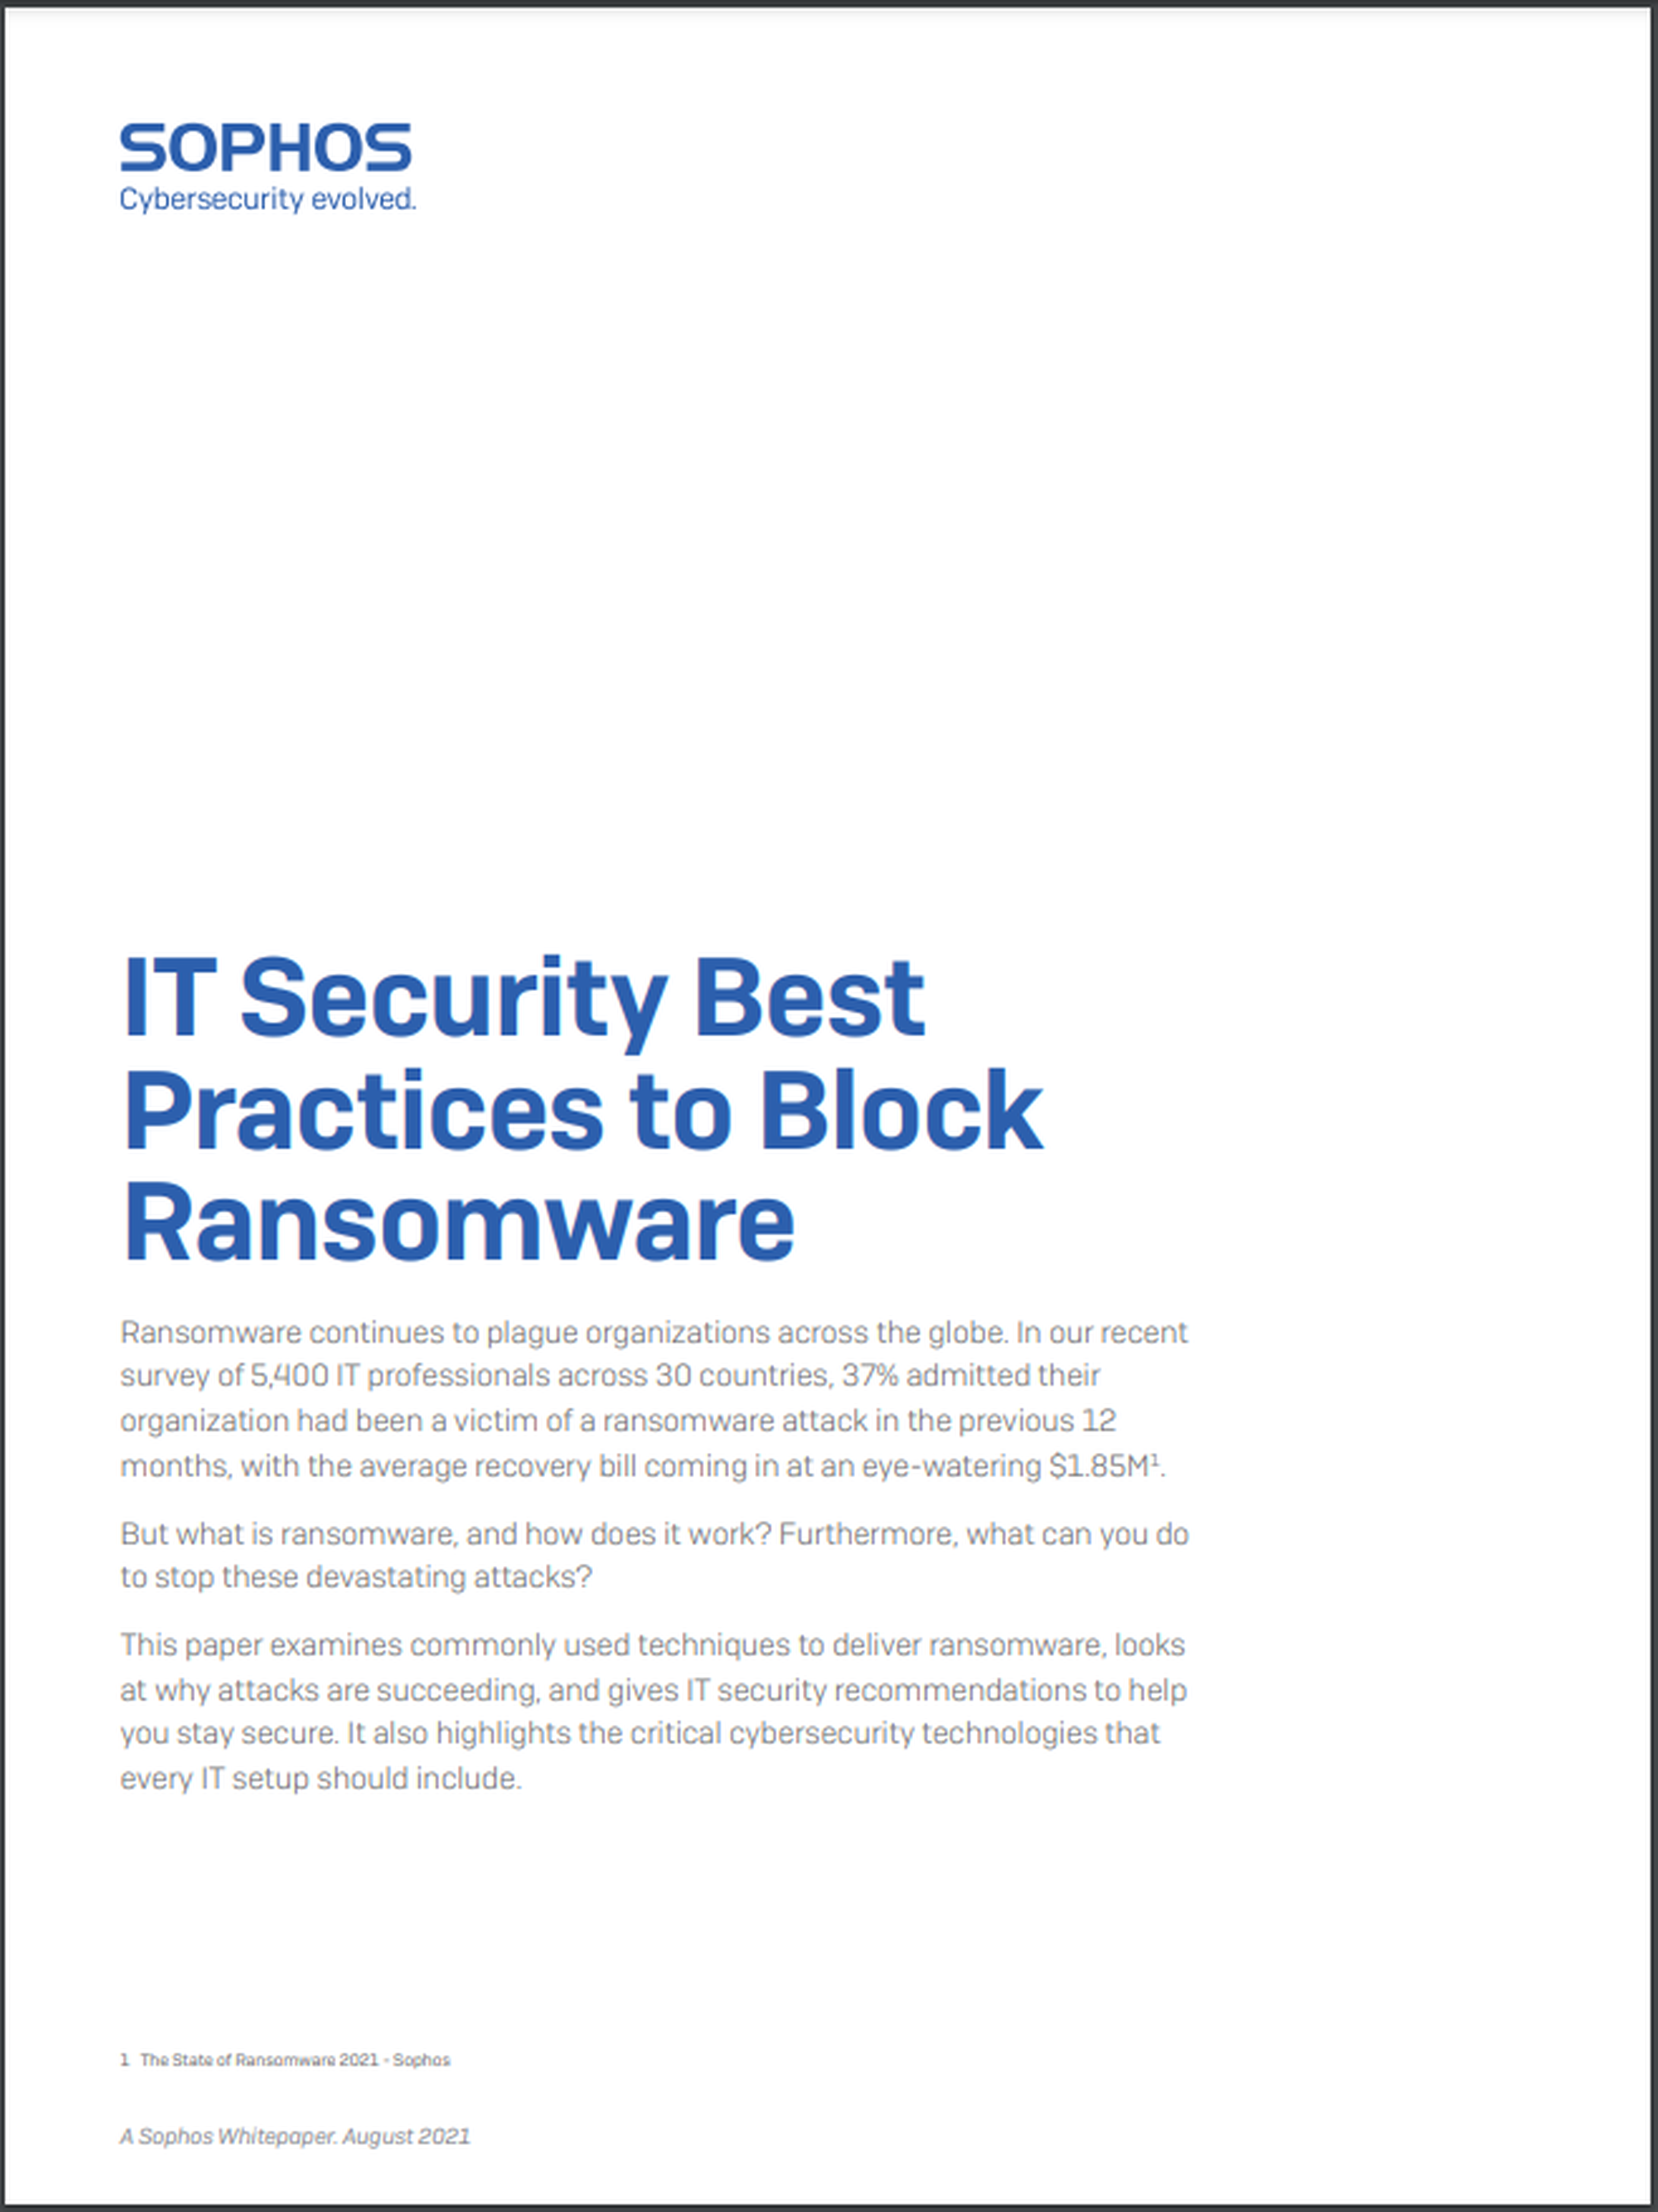 IT Security Best Practices to Block Ransomware